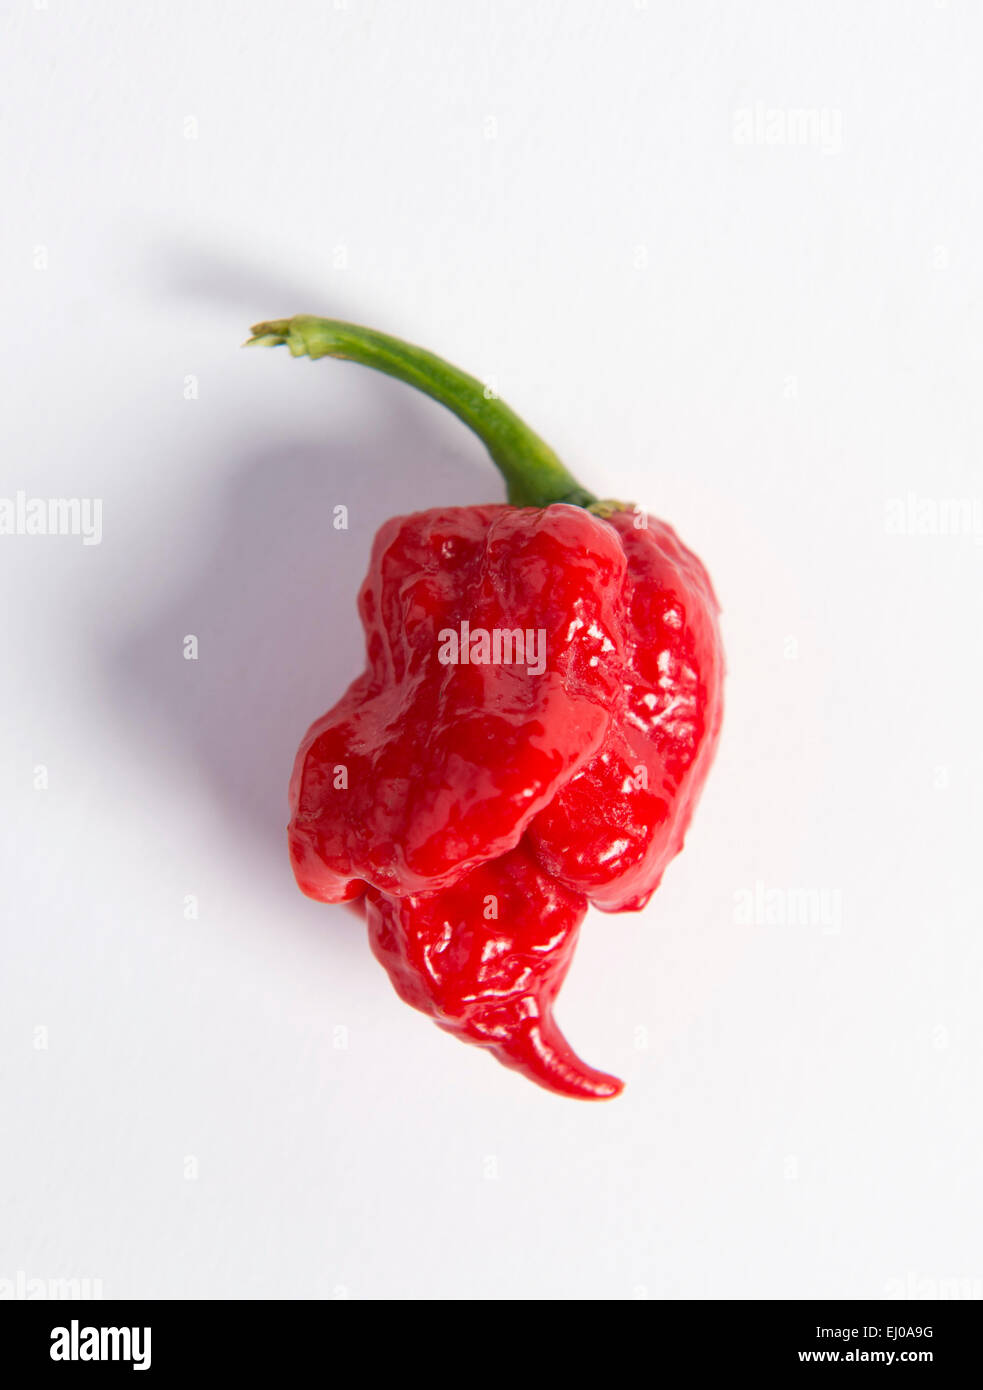 Re. The Clifton Chilli Club from Bristol meeting at the Dovercourt Allotments - A Trinidad Moruga Scorpion. Stock Photo